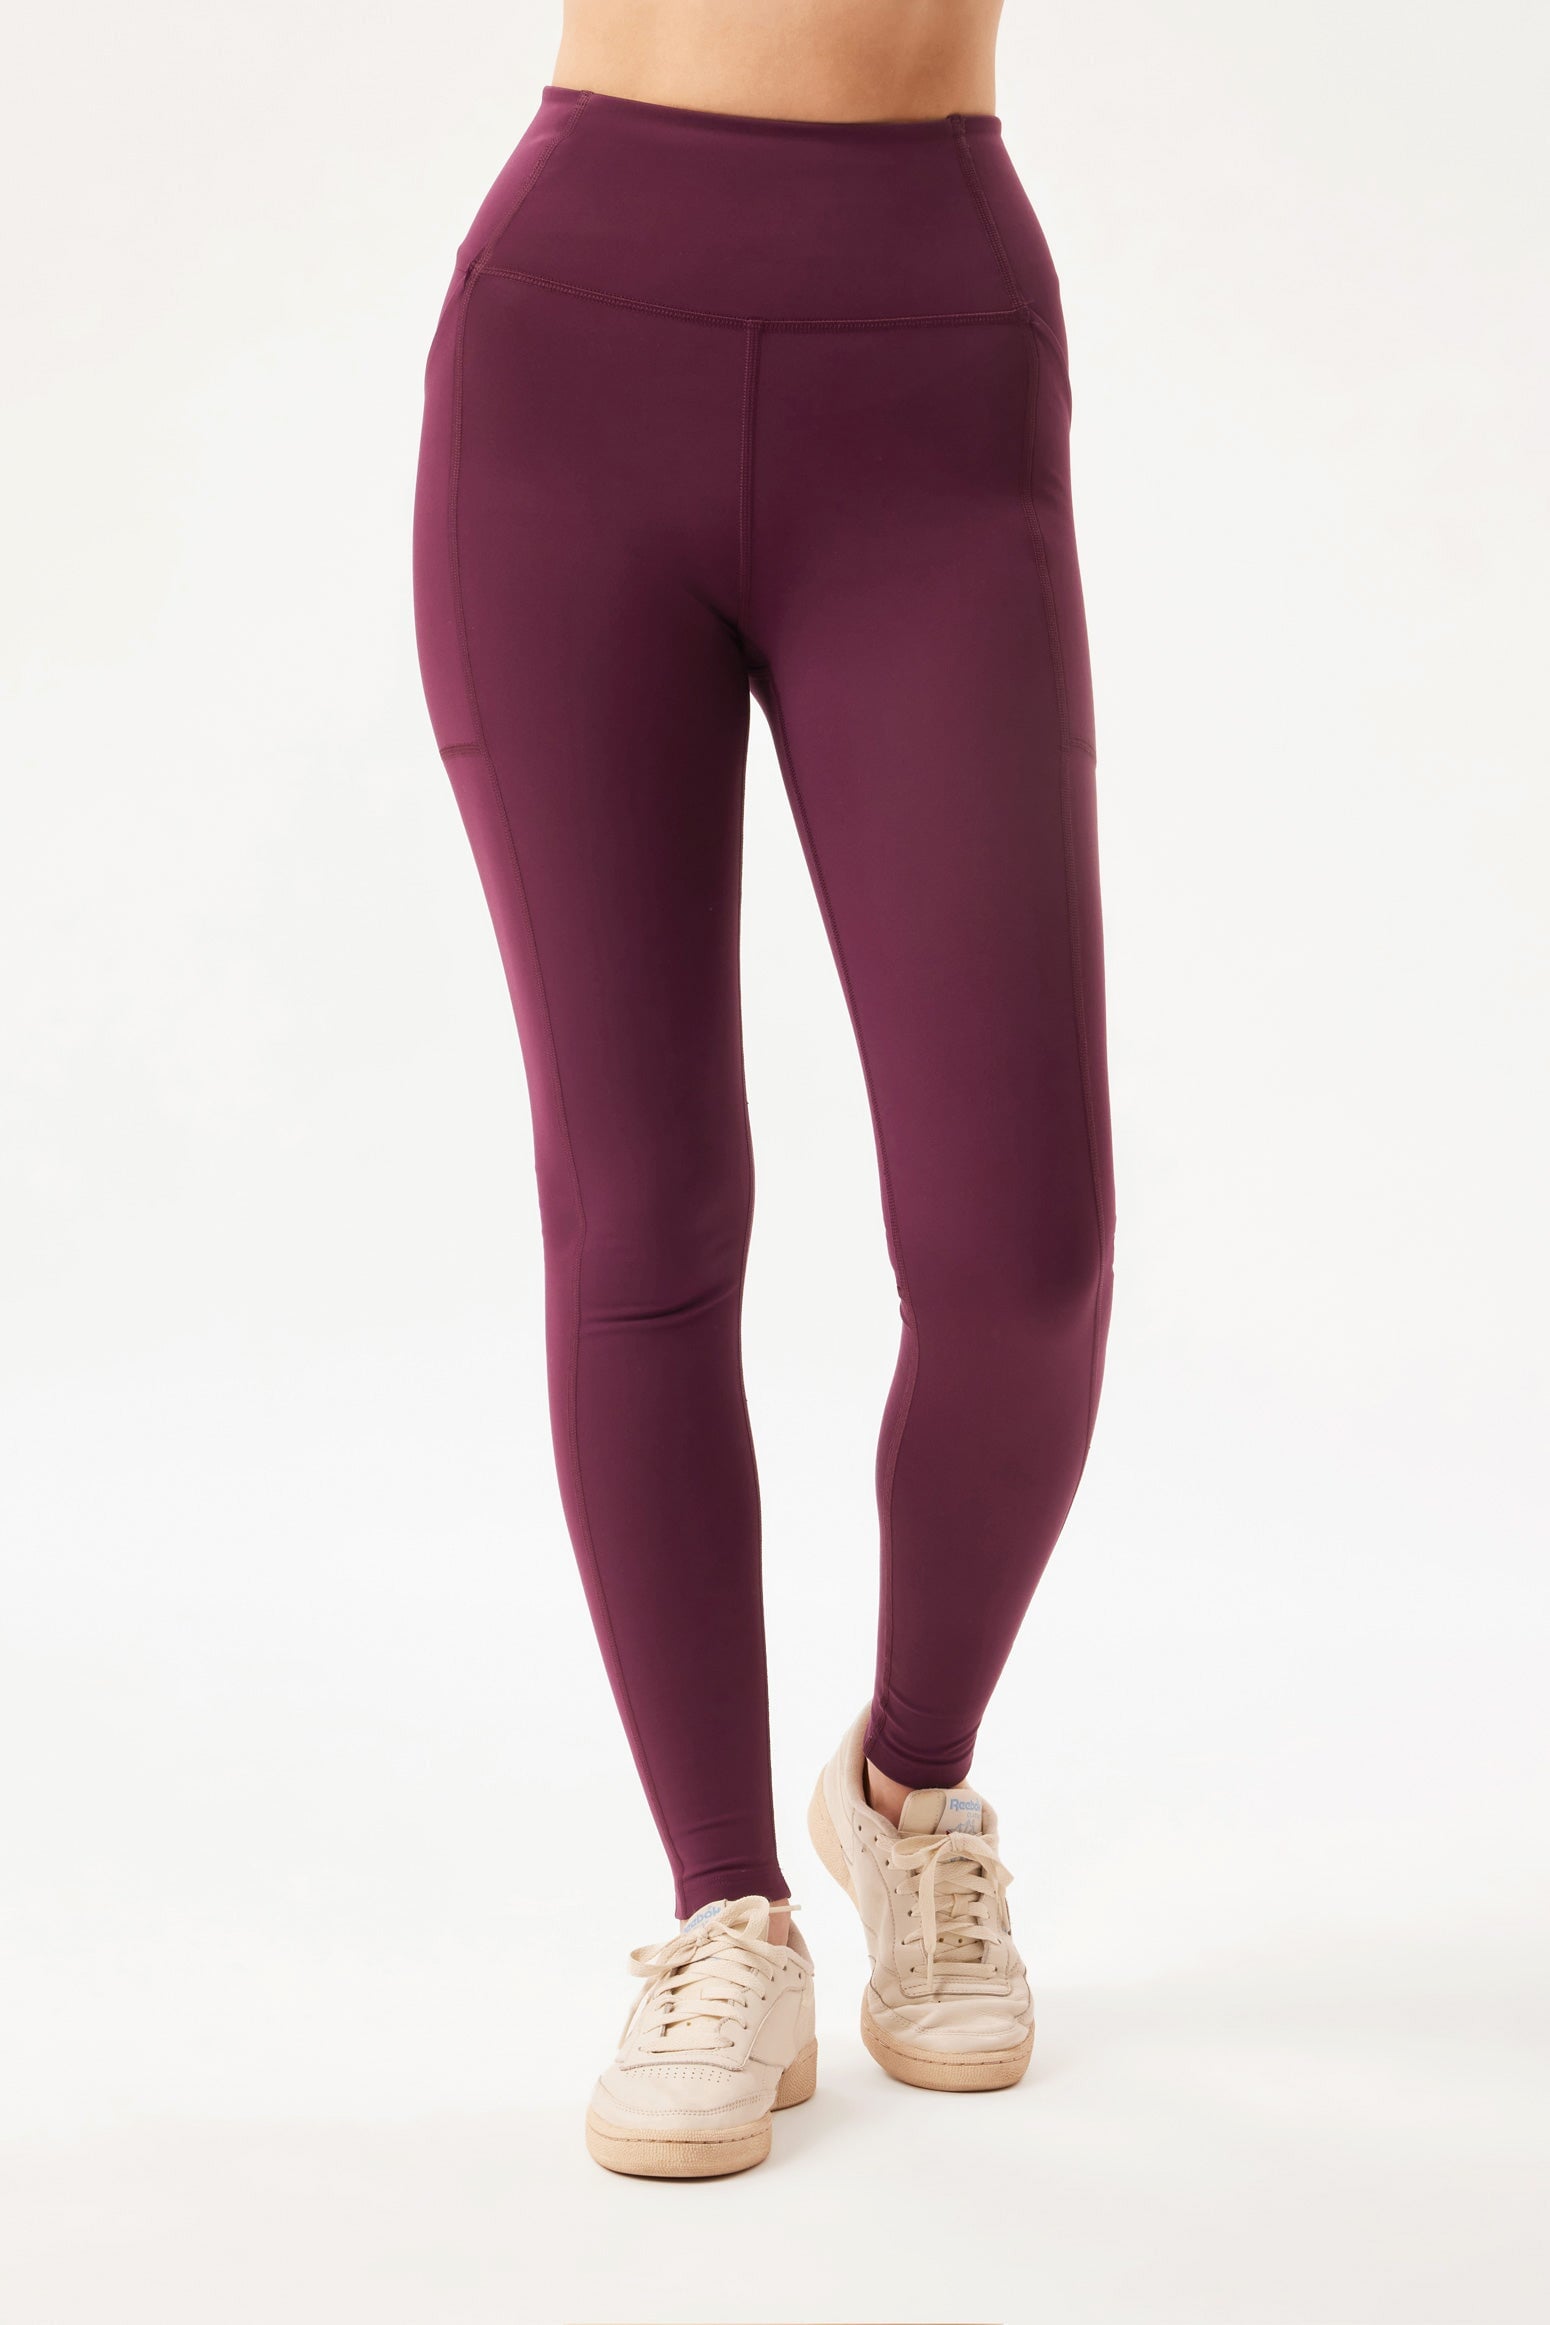 Women's Recycled Polyester Leggings  Sustainable Clothing at